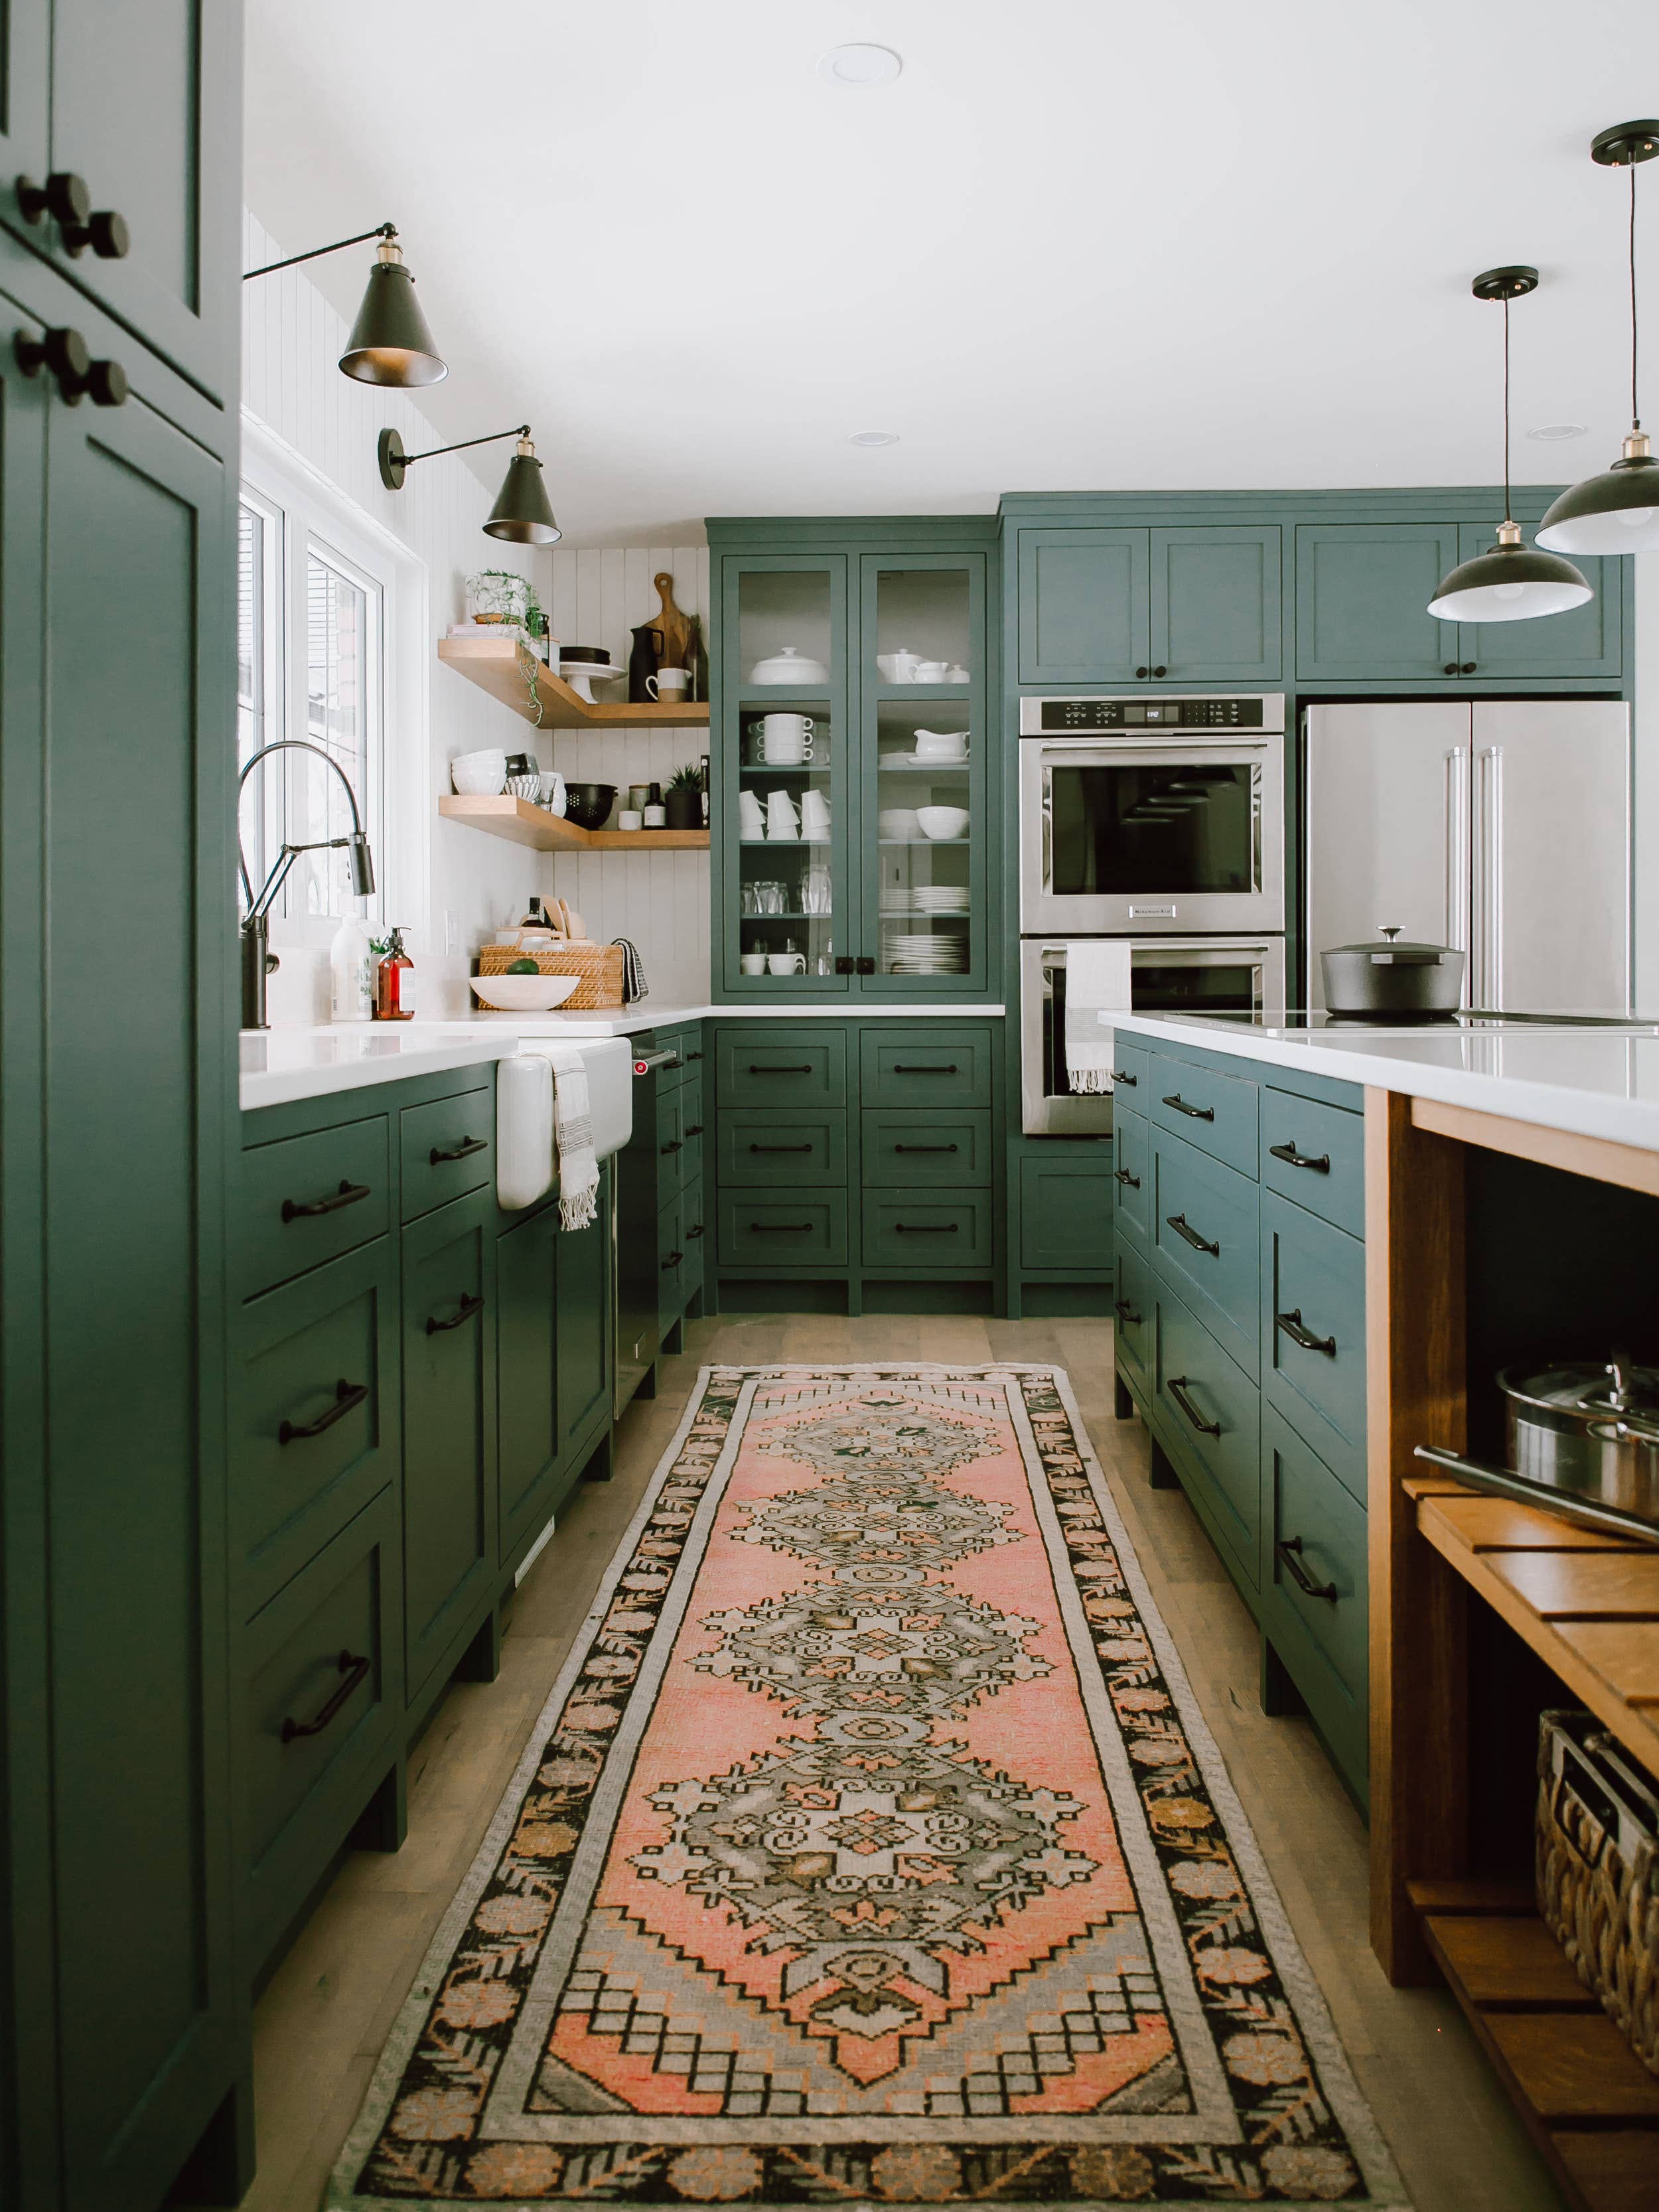 Forget About All-White: 13 Kitchen Colors You Should Definitely Try Instead